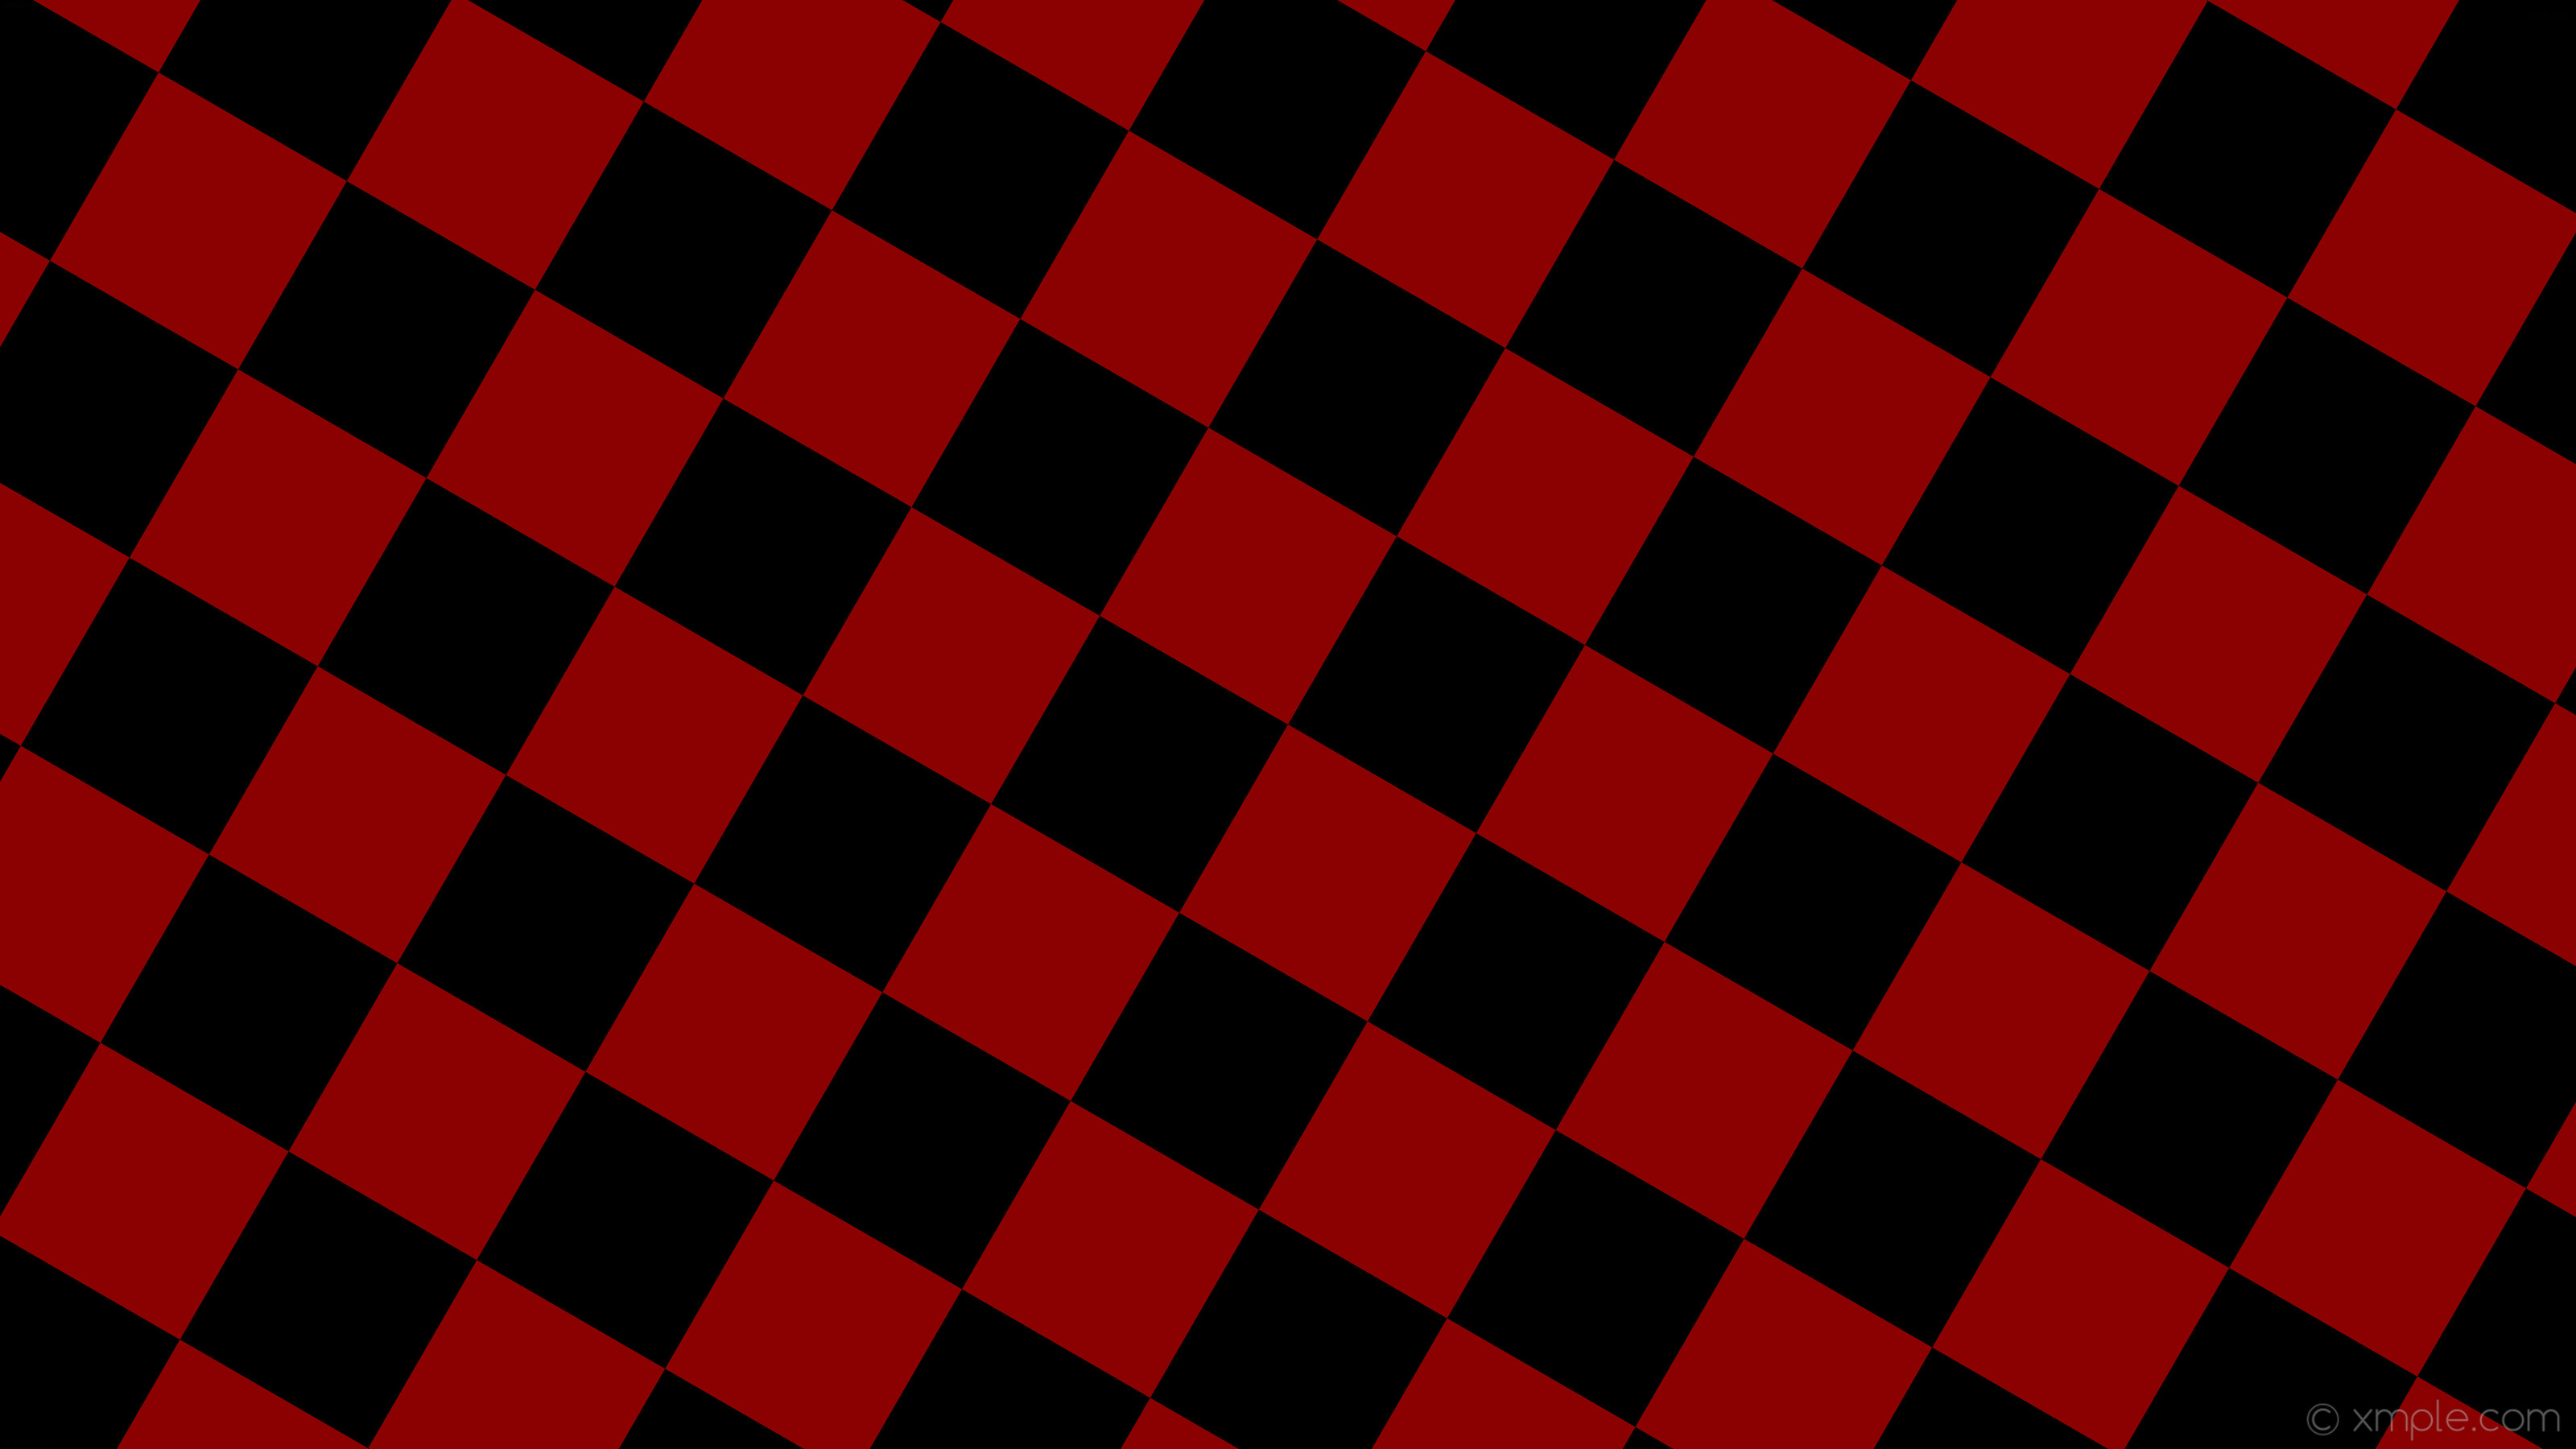 Black and White Checkerboard Wallpaper (47+ images)